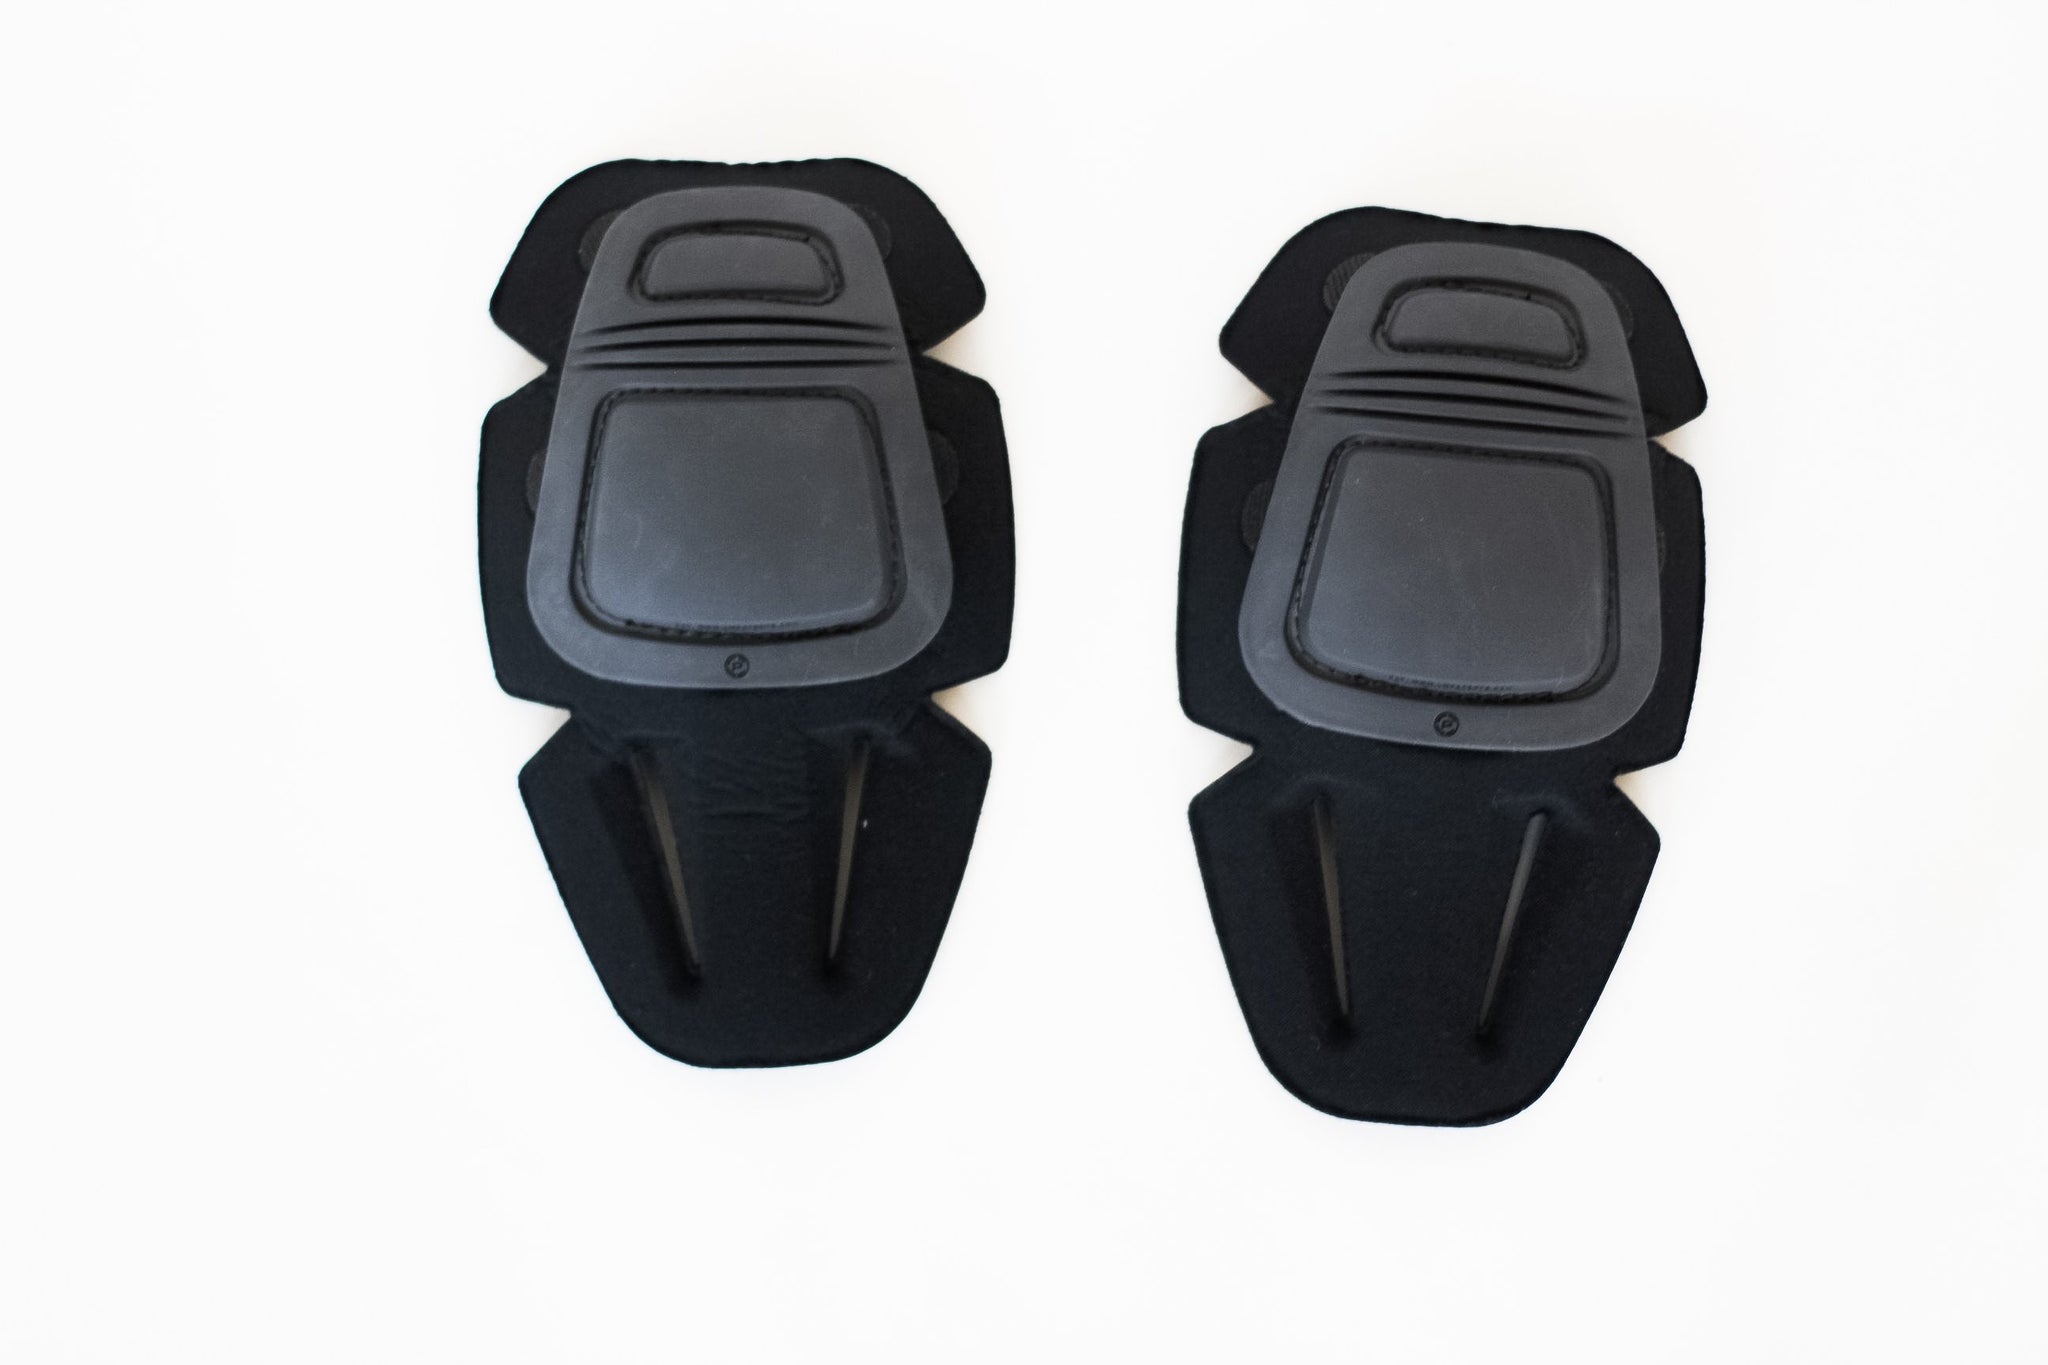 *Returning Soon* Crye Precision AirFlex Combat Knee Pads